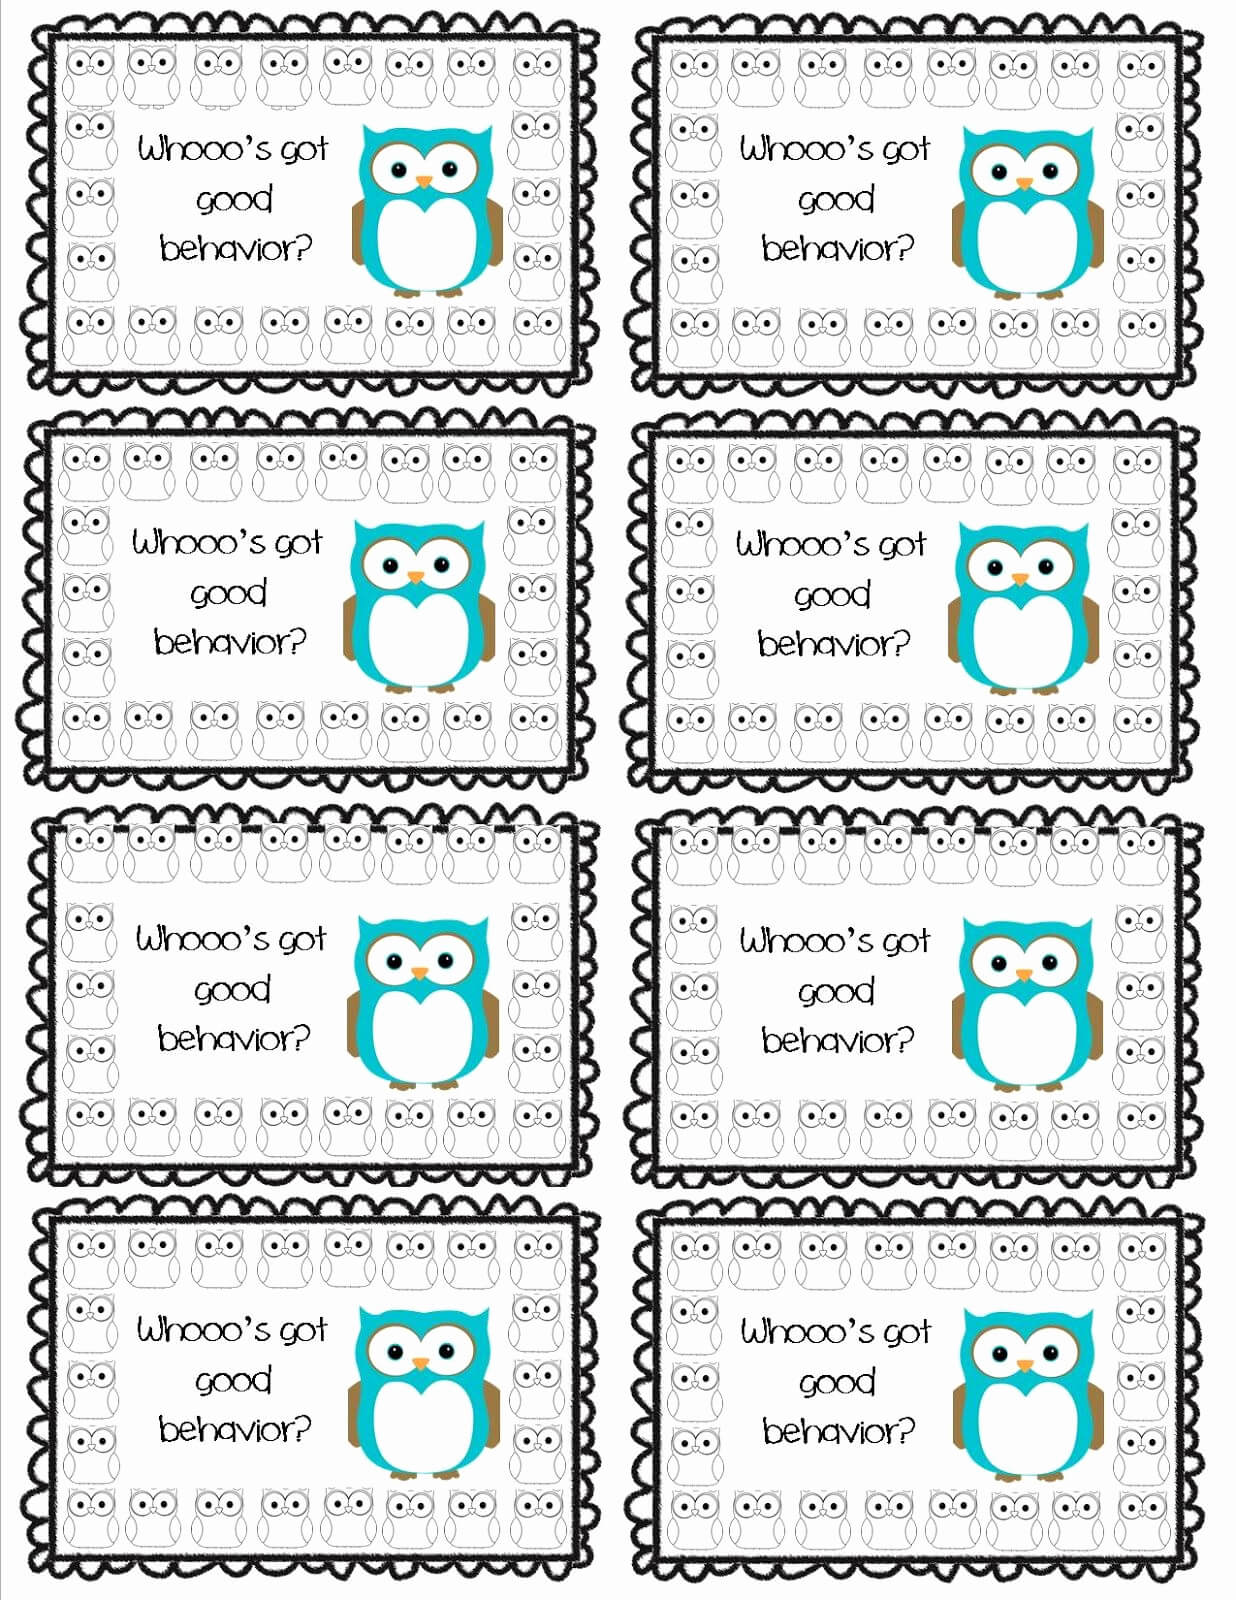 Free Printable Punch Card Template And Whooo S Got Good Inside Free Printable Punch Card Template